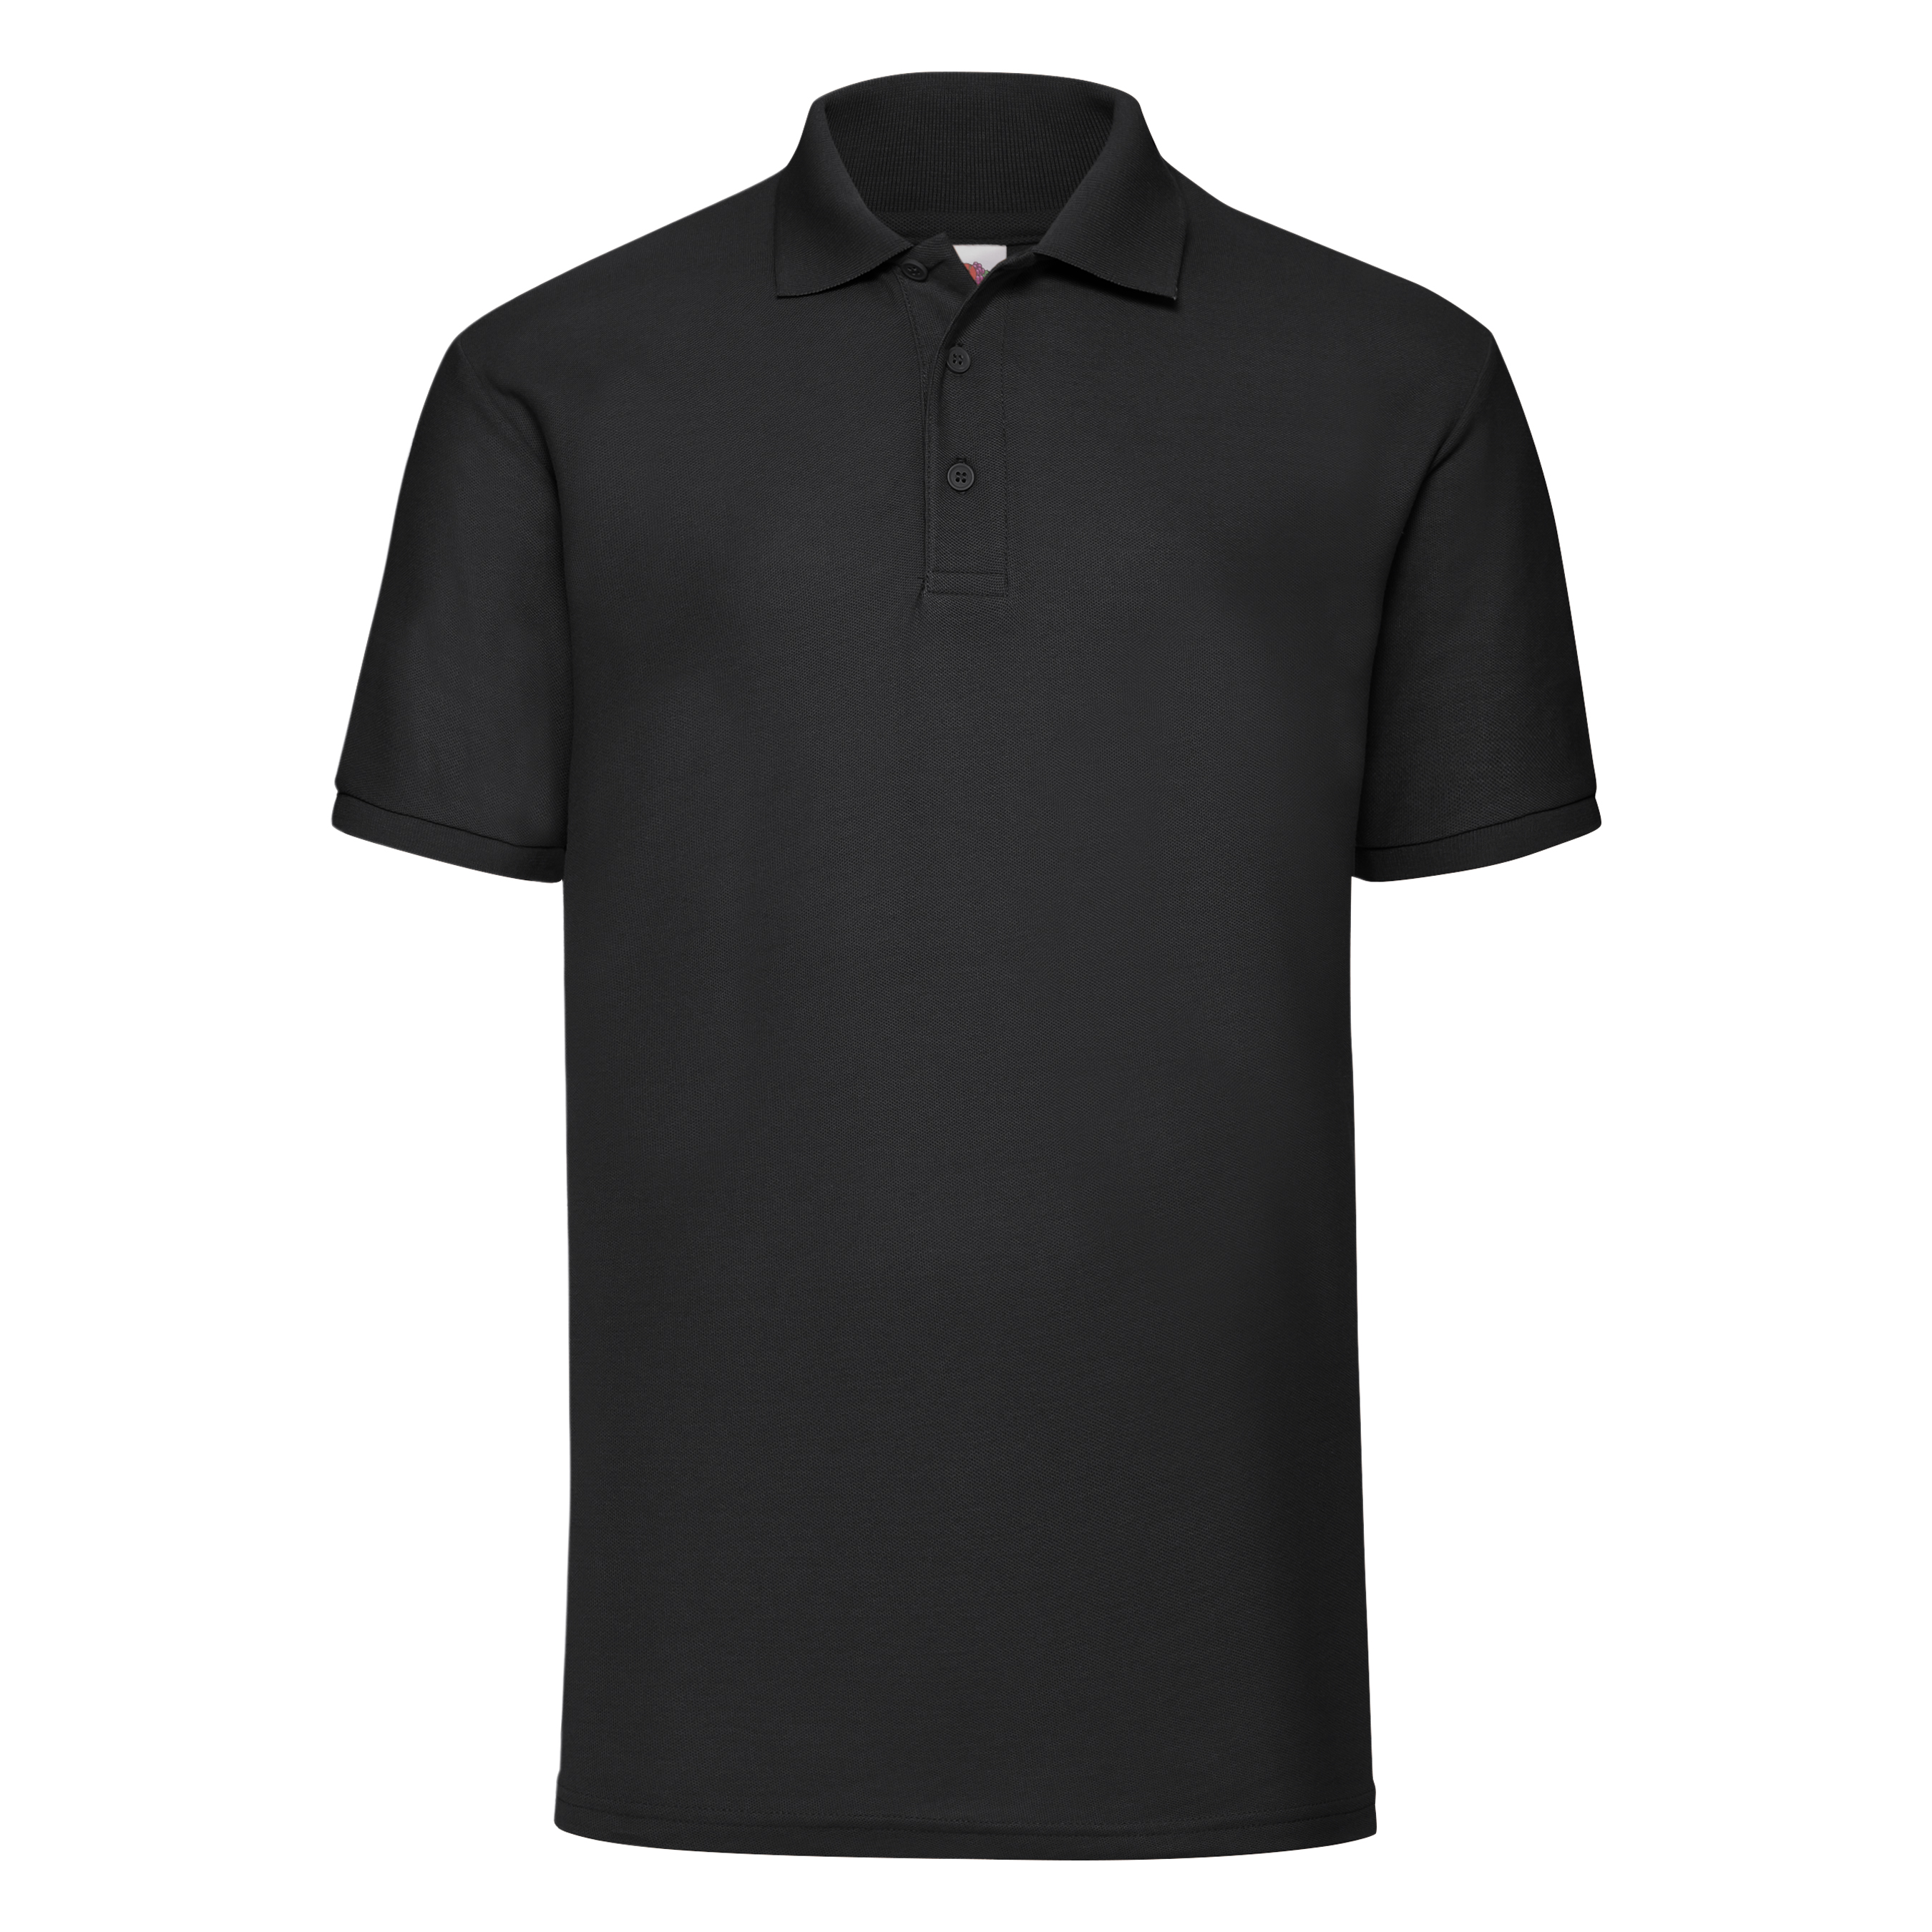 ax-httpswebsystems.s3.amazonaws.comtmp_for_downloadfruit-of-the-loom-65-35-polo-black.jpg